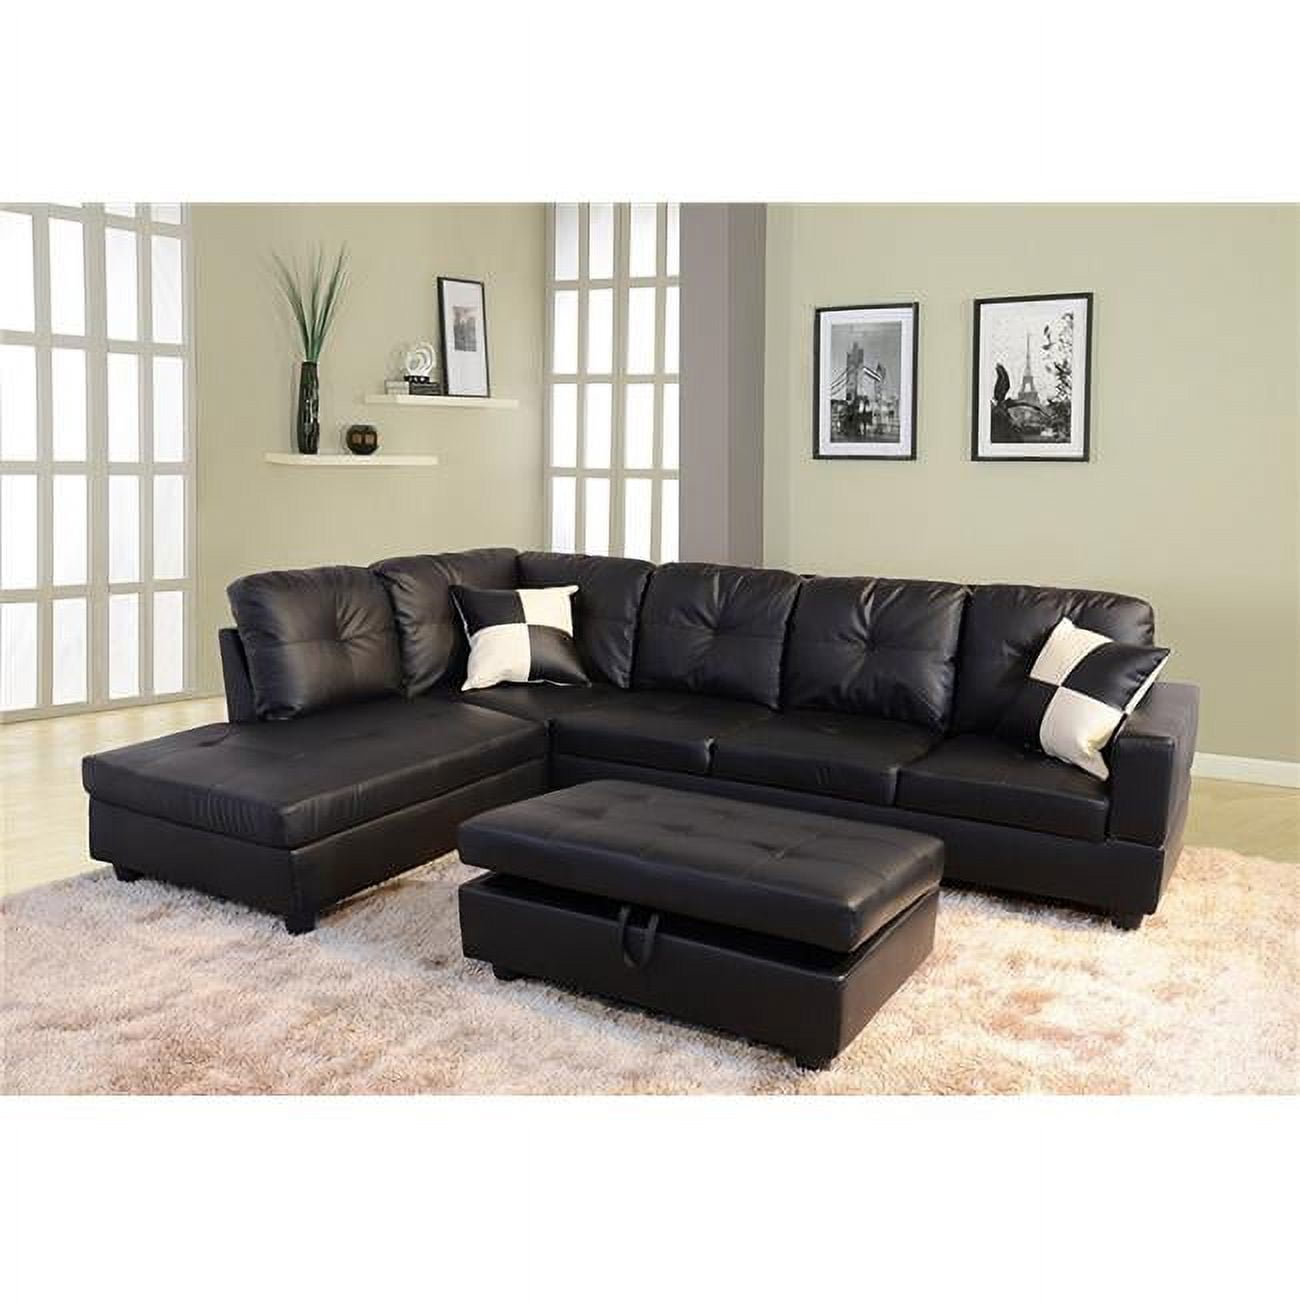 Picture of Beverly Fine Furniture F91A-3PC Cavenzi Black Faux Leather Left-facing Sectional Sofa Set